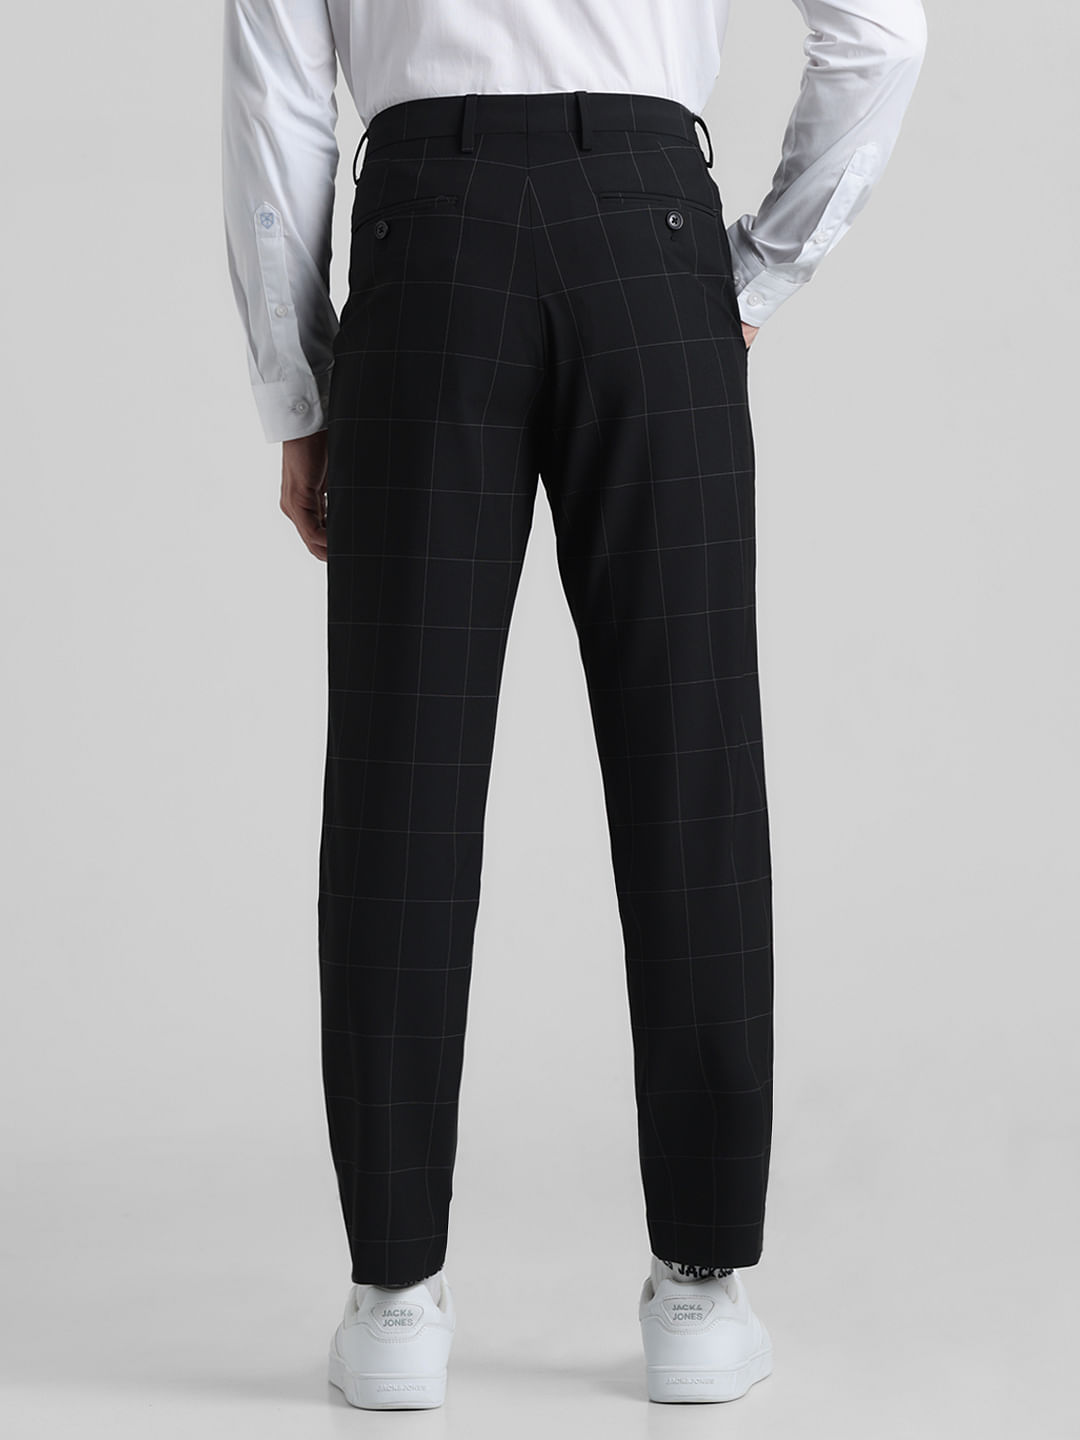 uNidraa | Black White Checked Printed Cotton Lounge Pants For Men